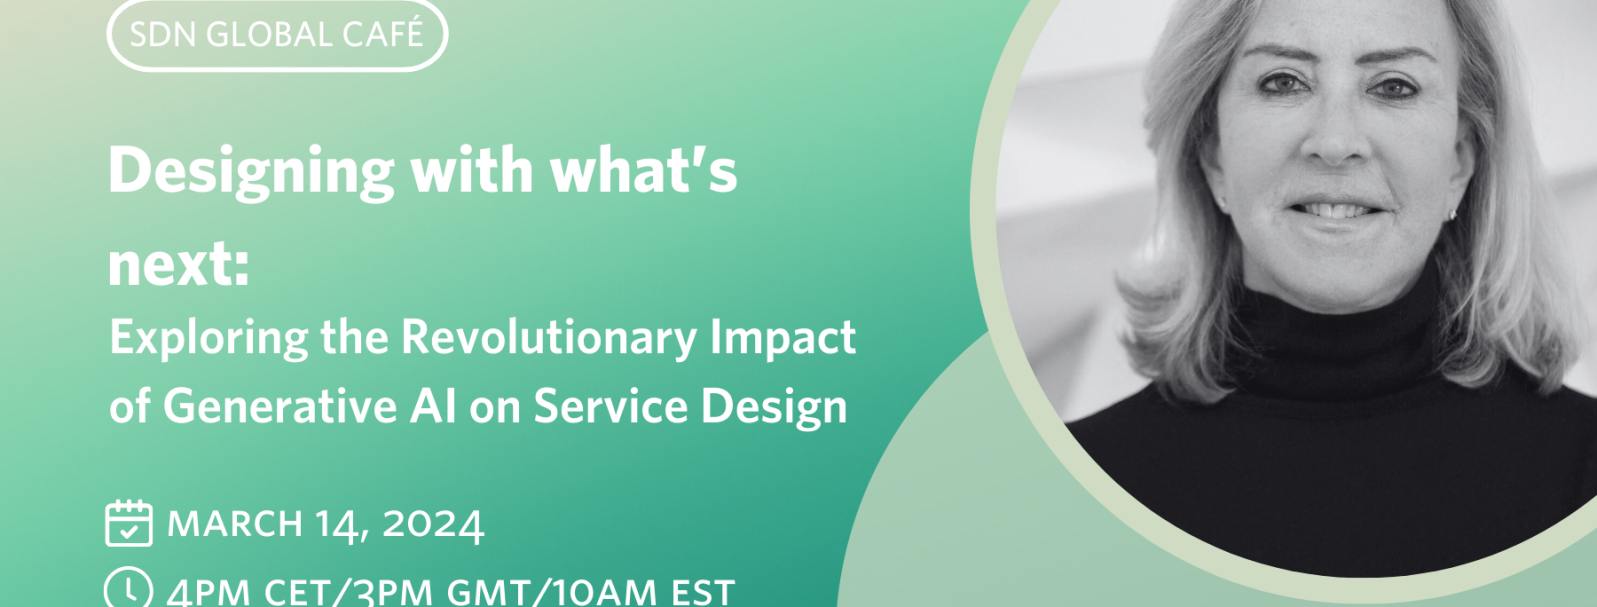 SDN Global Café: Designing with what’s next: Exploring the Revolutionary Impact of Generative AI on Service Design